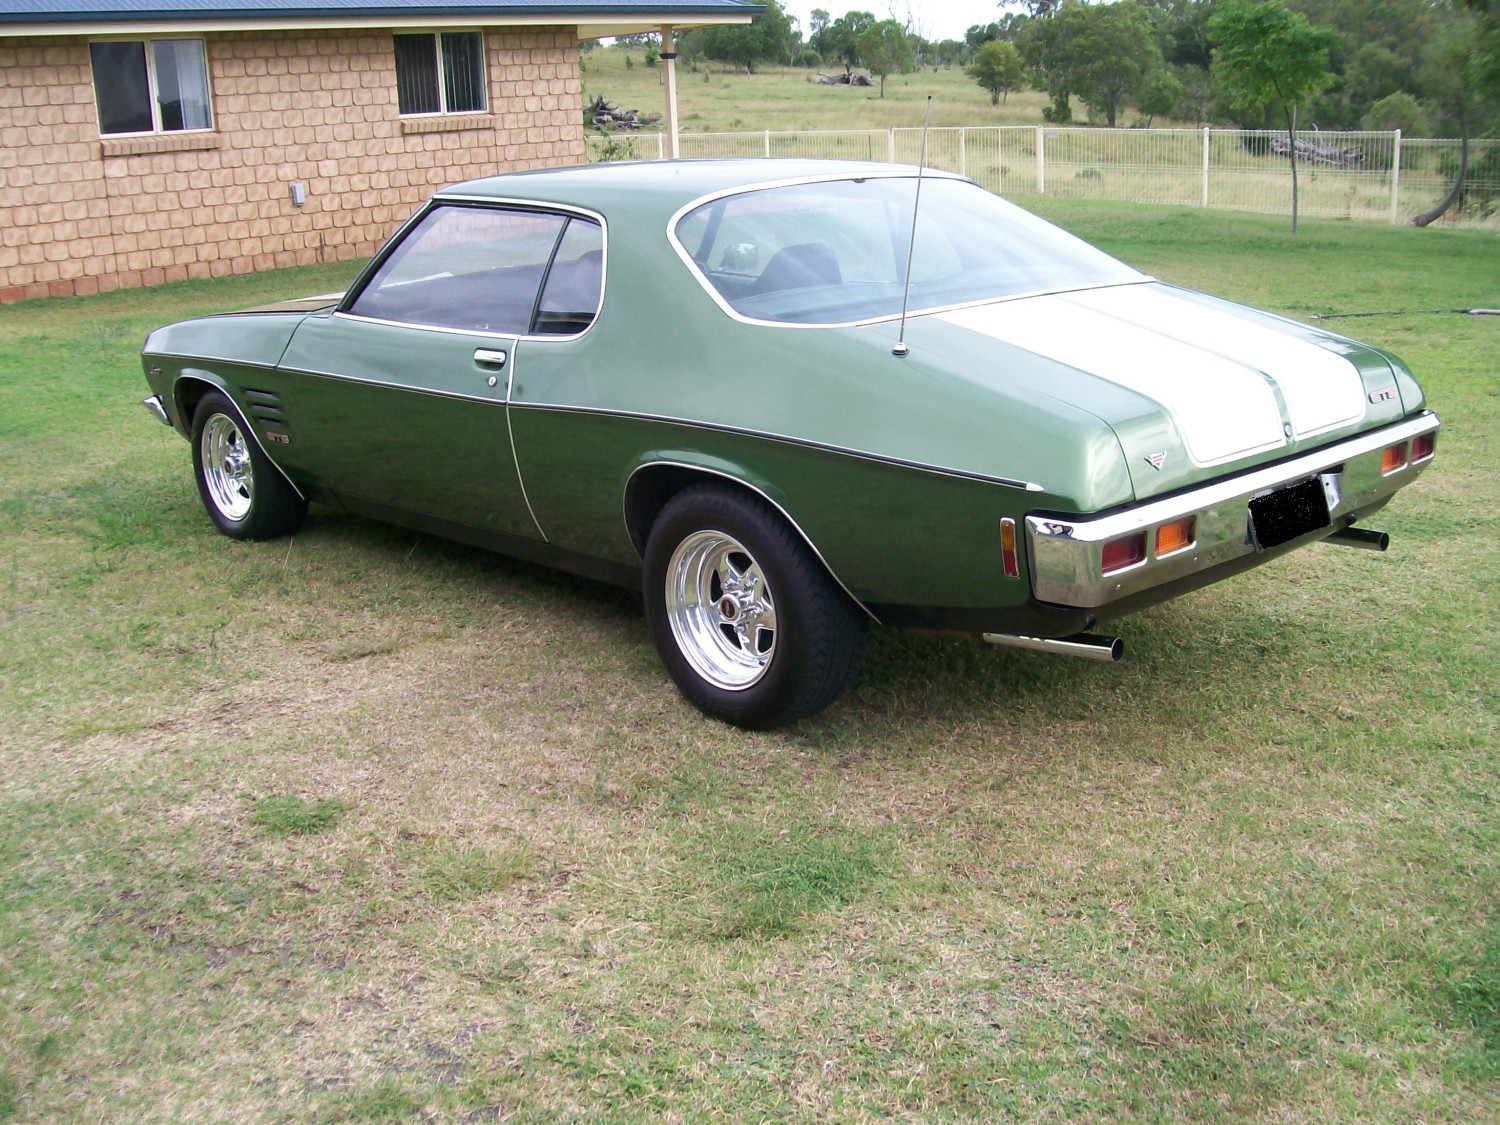 1974 Holden HQ GTS Monaro coupe 308 four speed